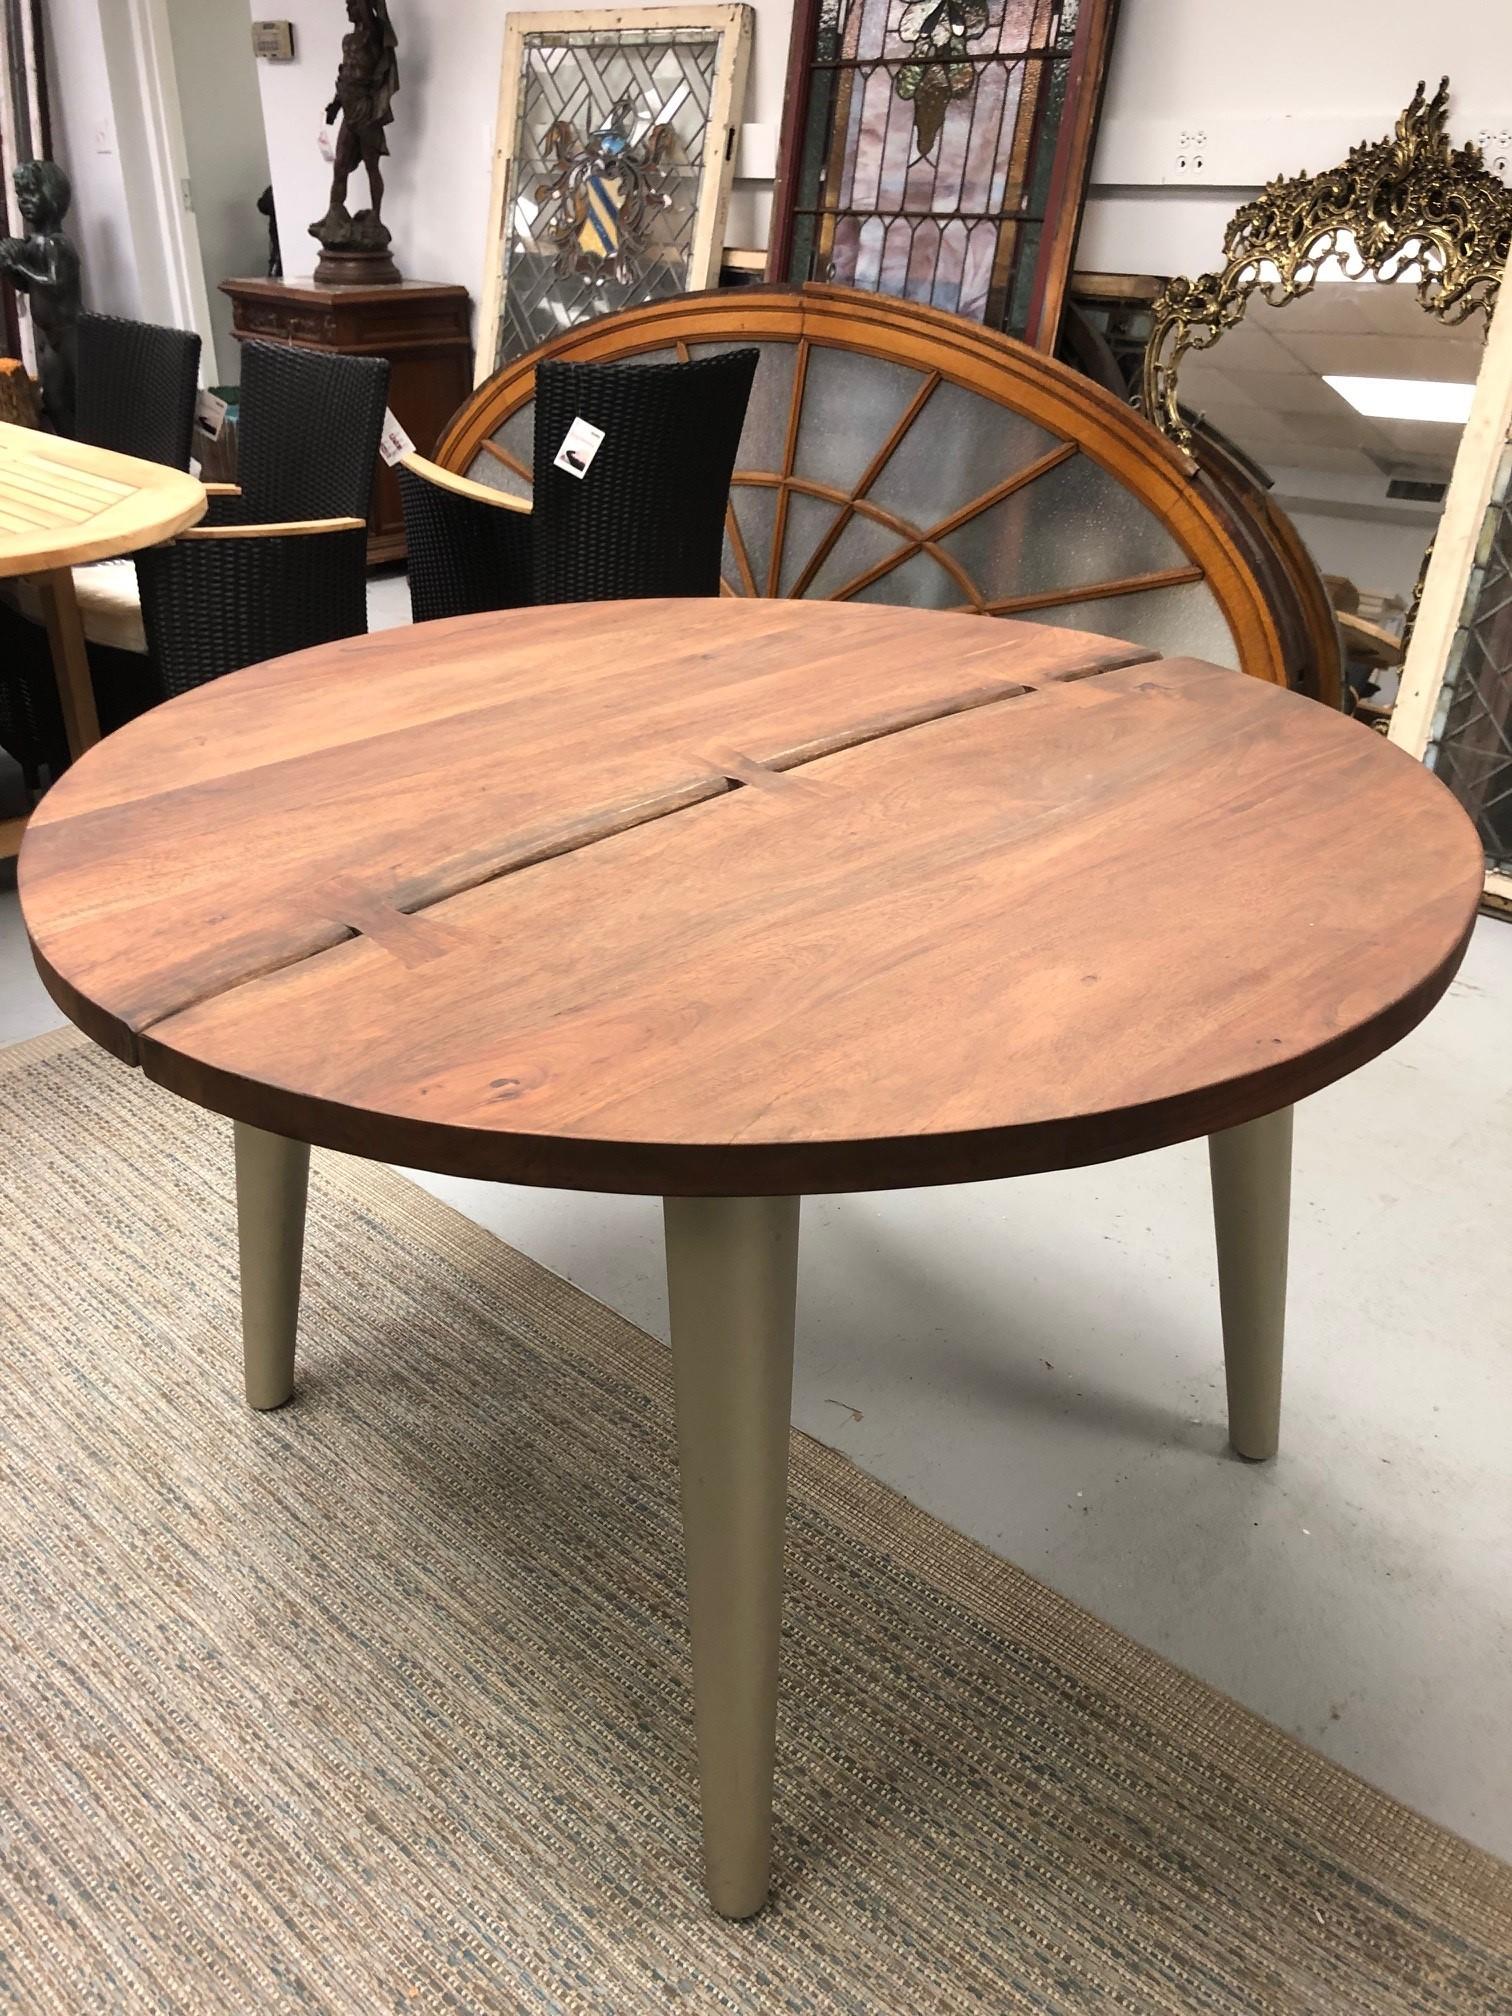 Round Acacia wood dining table on four legs with a live edge center cut. Acacia wood is a hardwood from India that looks like walnut beautiful and durable.